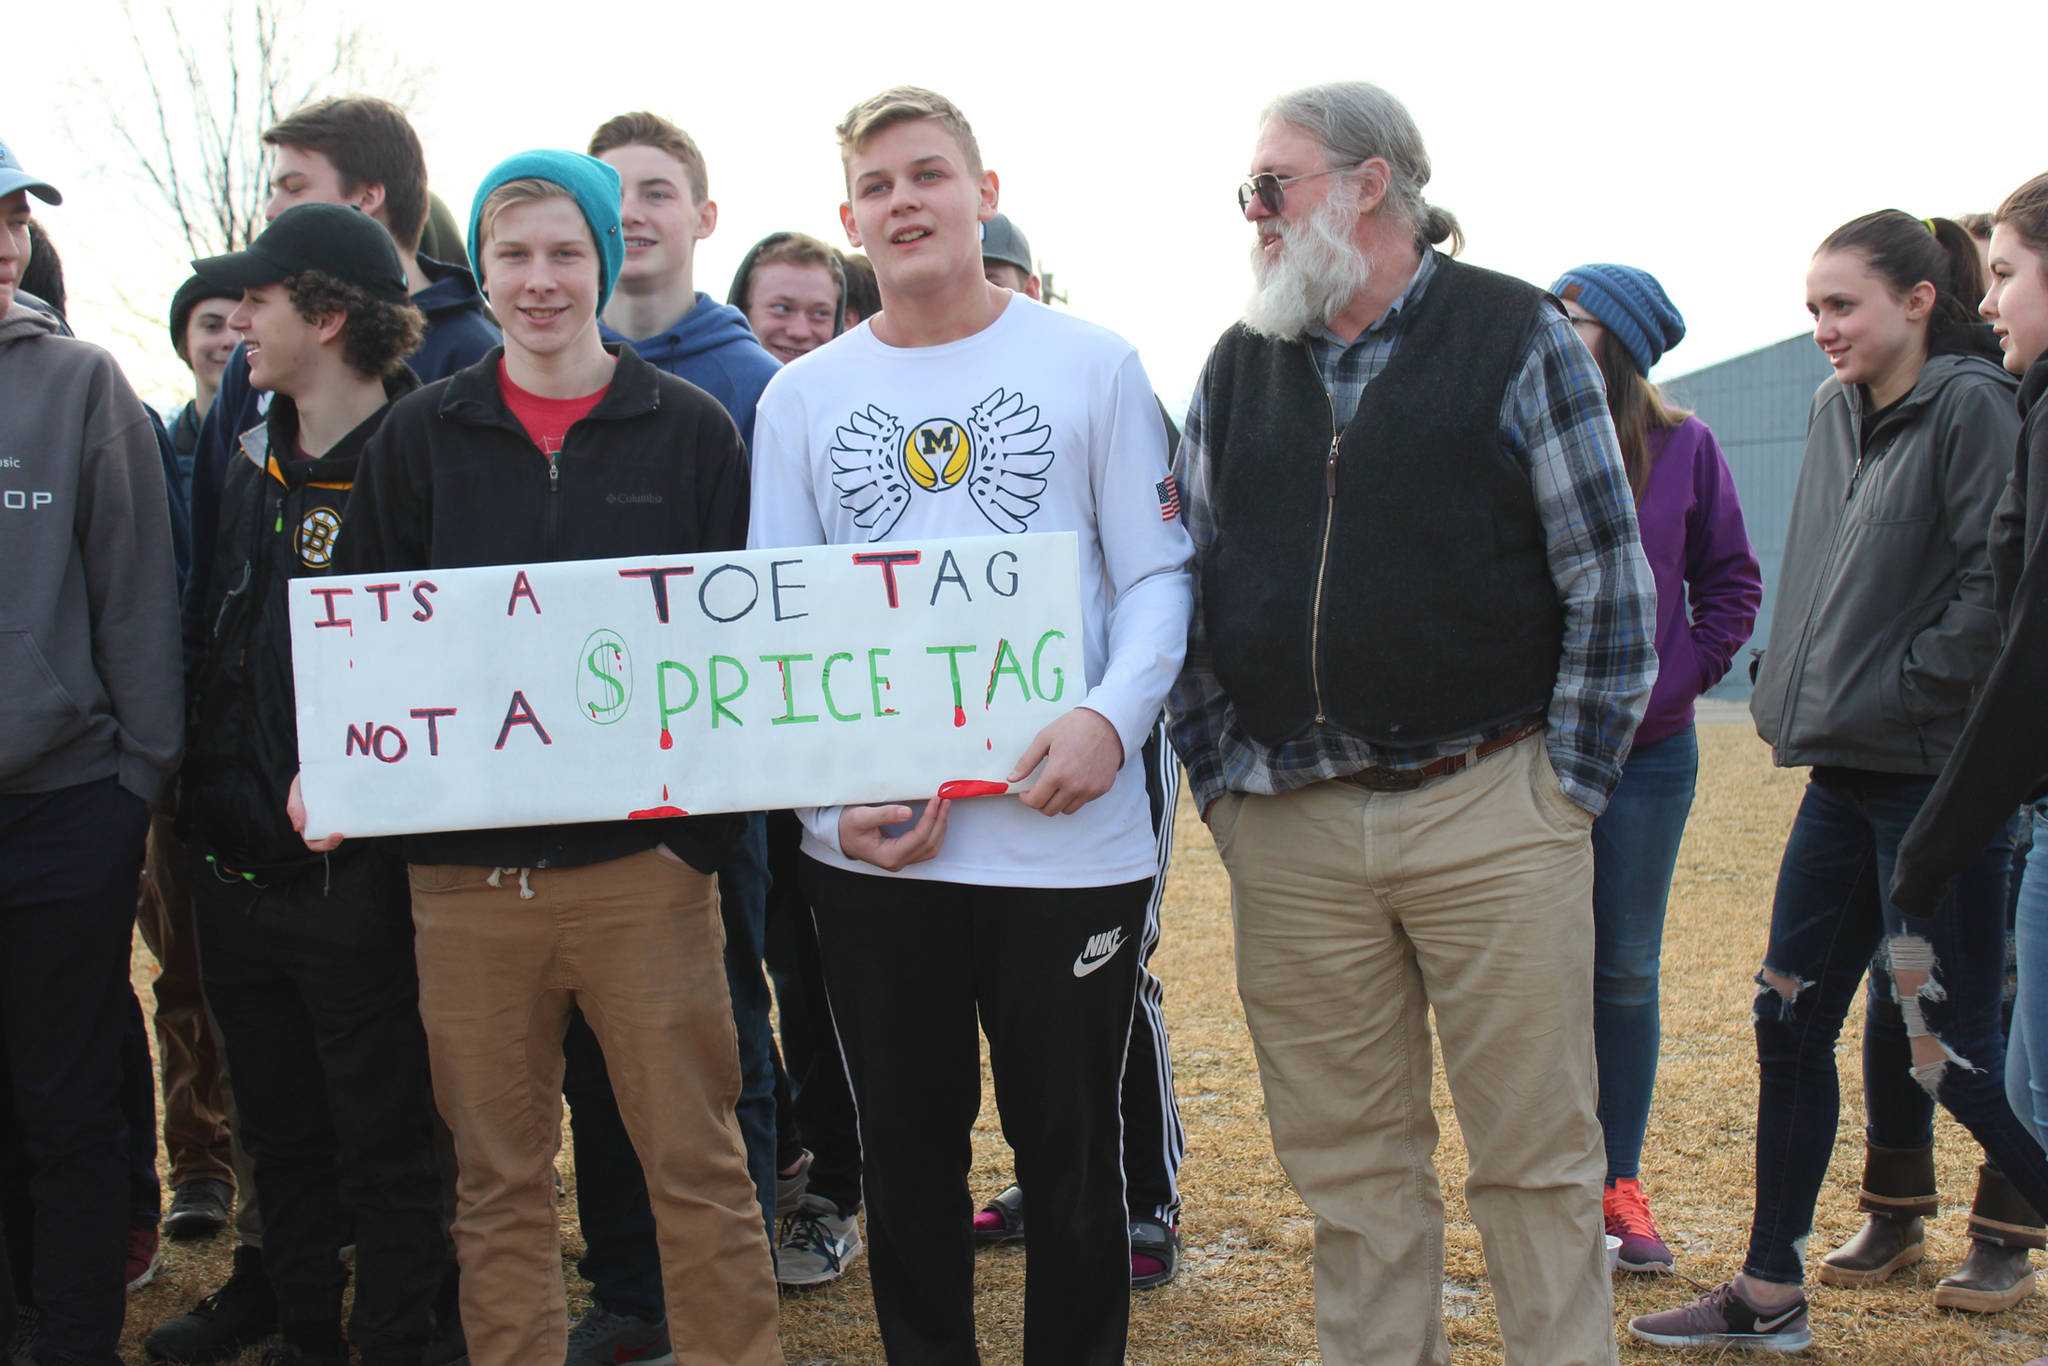 From left to right: Freshman Jack Strydom, freshman River Mann and science teacher Bruce Rife stand with a group of about 100 students and some staff who staged a walkout at Homer High School on Wednesday, Feb. 21, 2018 in Homer, Alaska. Their sign reads, “It’s a toe tag, not a price tag.” (Photo by Megan Pacer/Homer News)